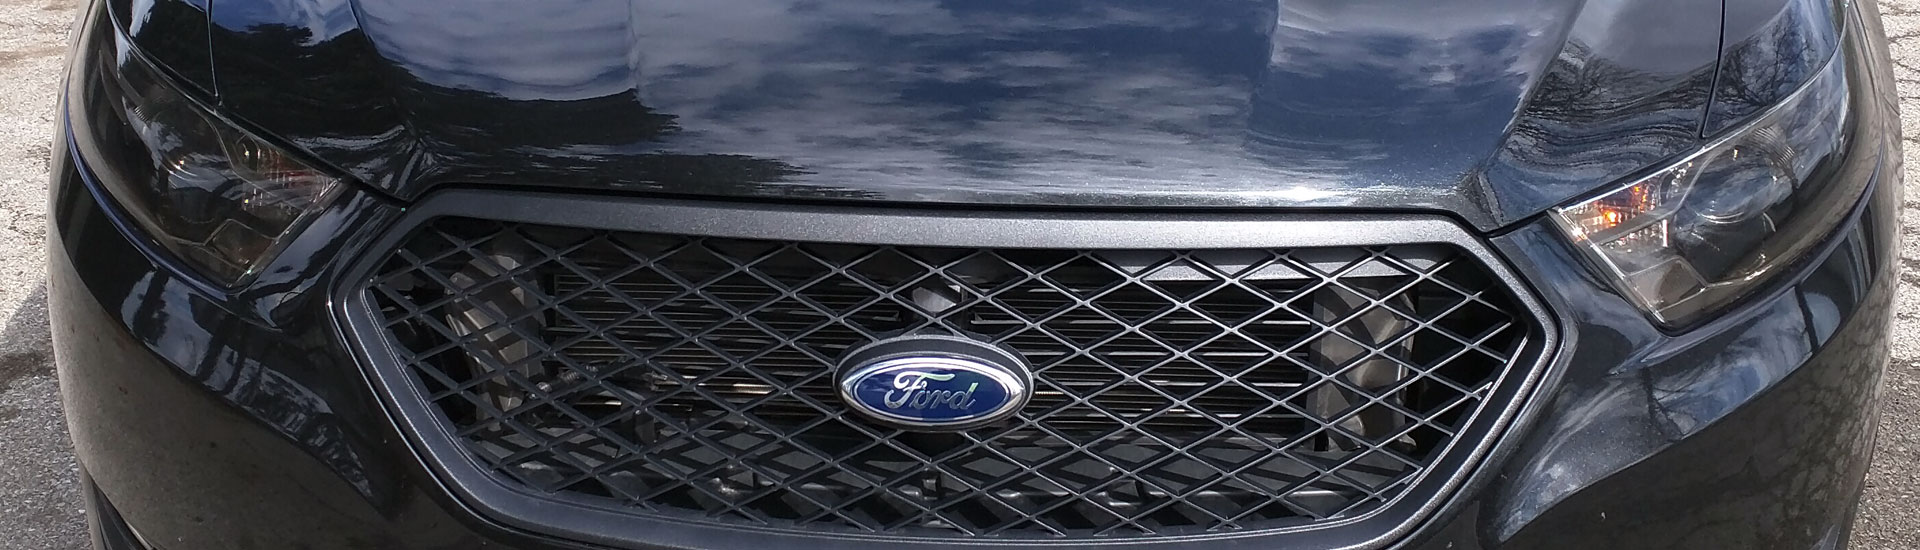 Ford Headlight Tint Covers